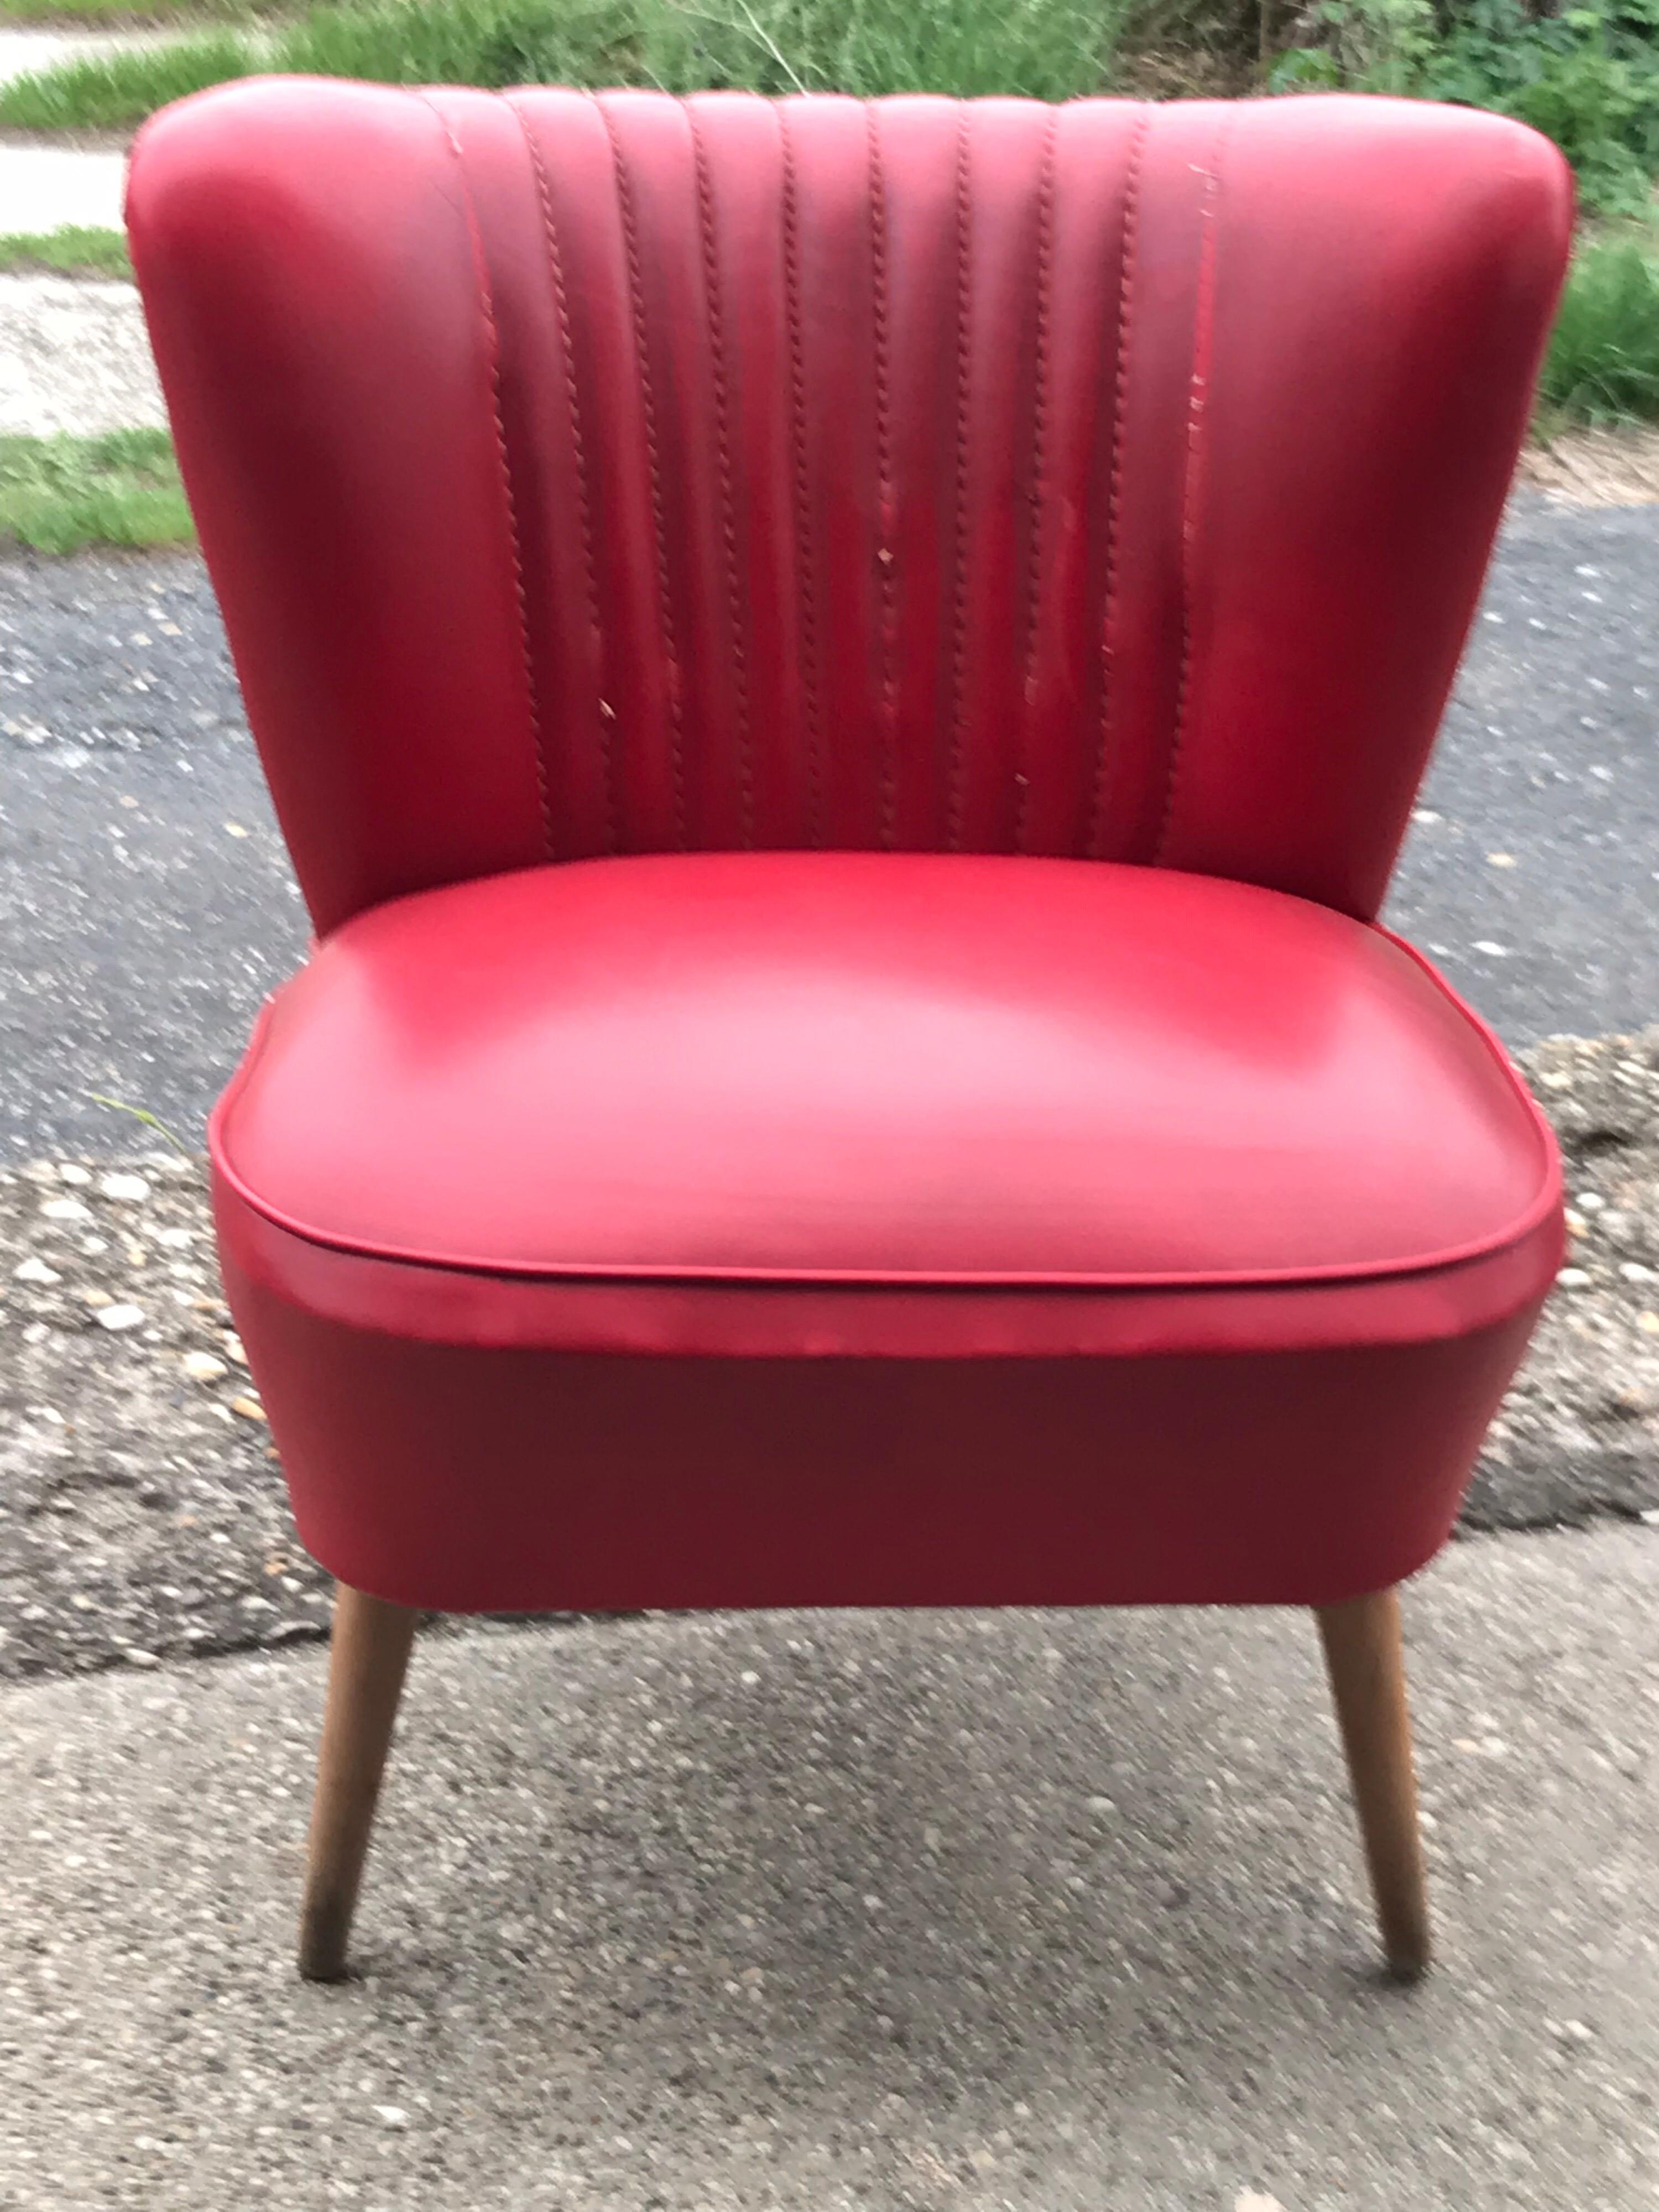 Mid-20th Century Mid Century 1950s-1960s Original Red Cocktail Chair Armchair For Sale